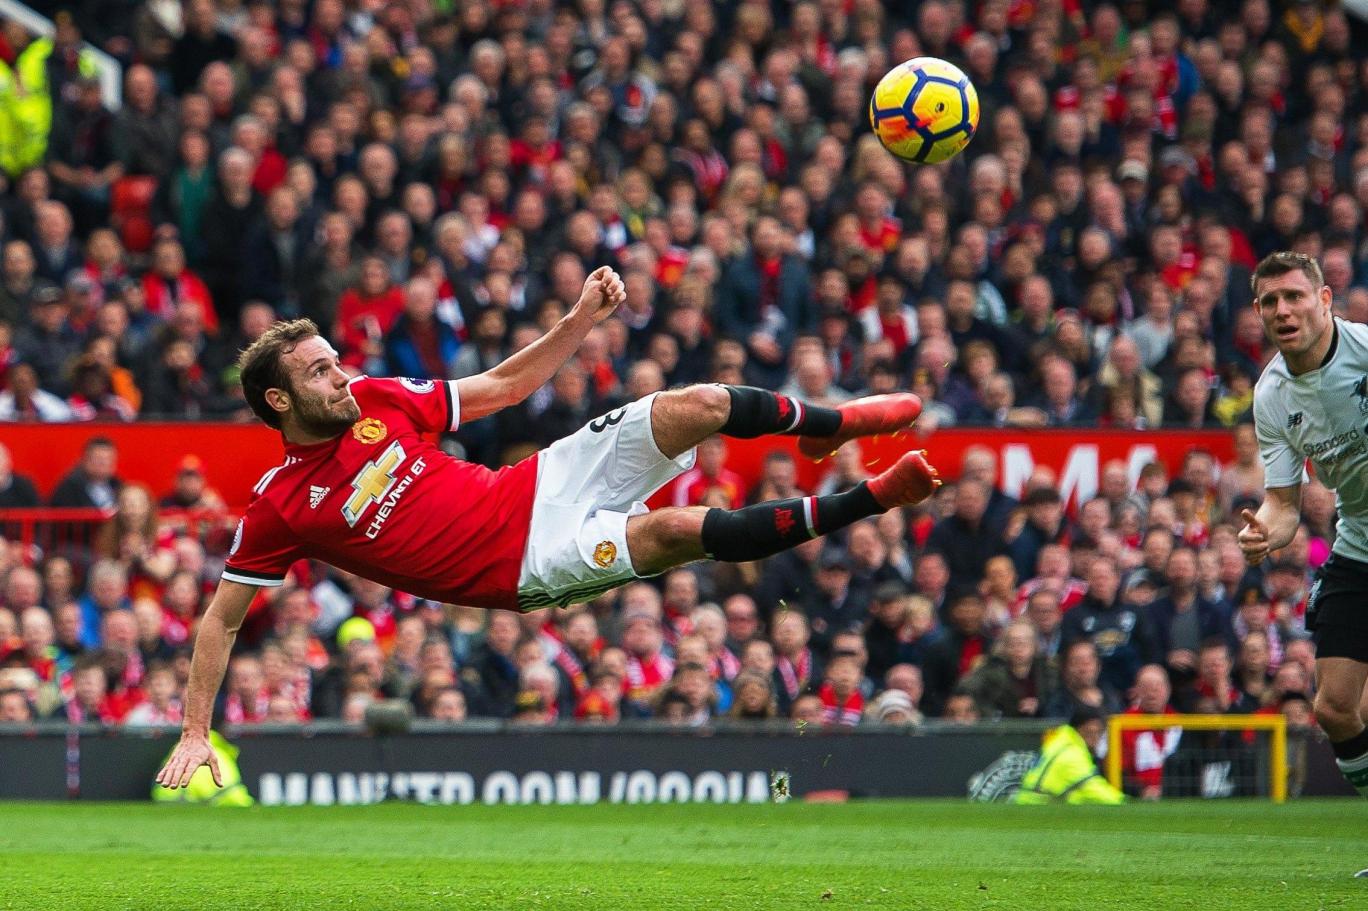 Manchester United star, Juan Mata has found a number of takers keen on securing his services in the summer transfer window. This includes Juventus, Inter Milan and AS Roma.